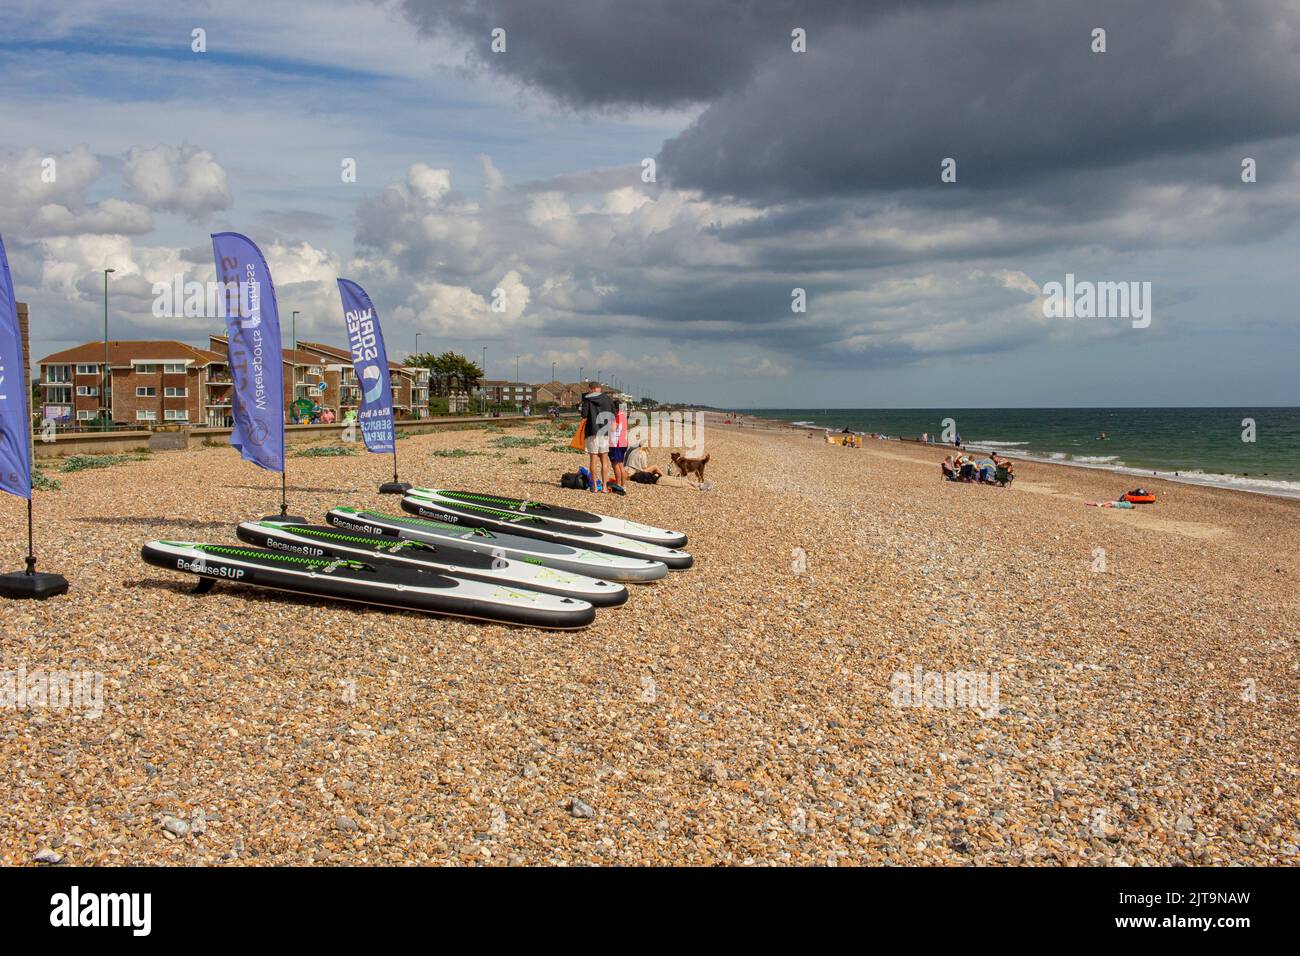 The East Beach, Littlehampton, West Sussex, UK; showing The Beach, a cafe and centre for watersports, with paddle boards on the beach Stock Photo